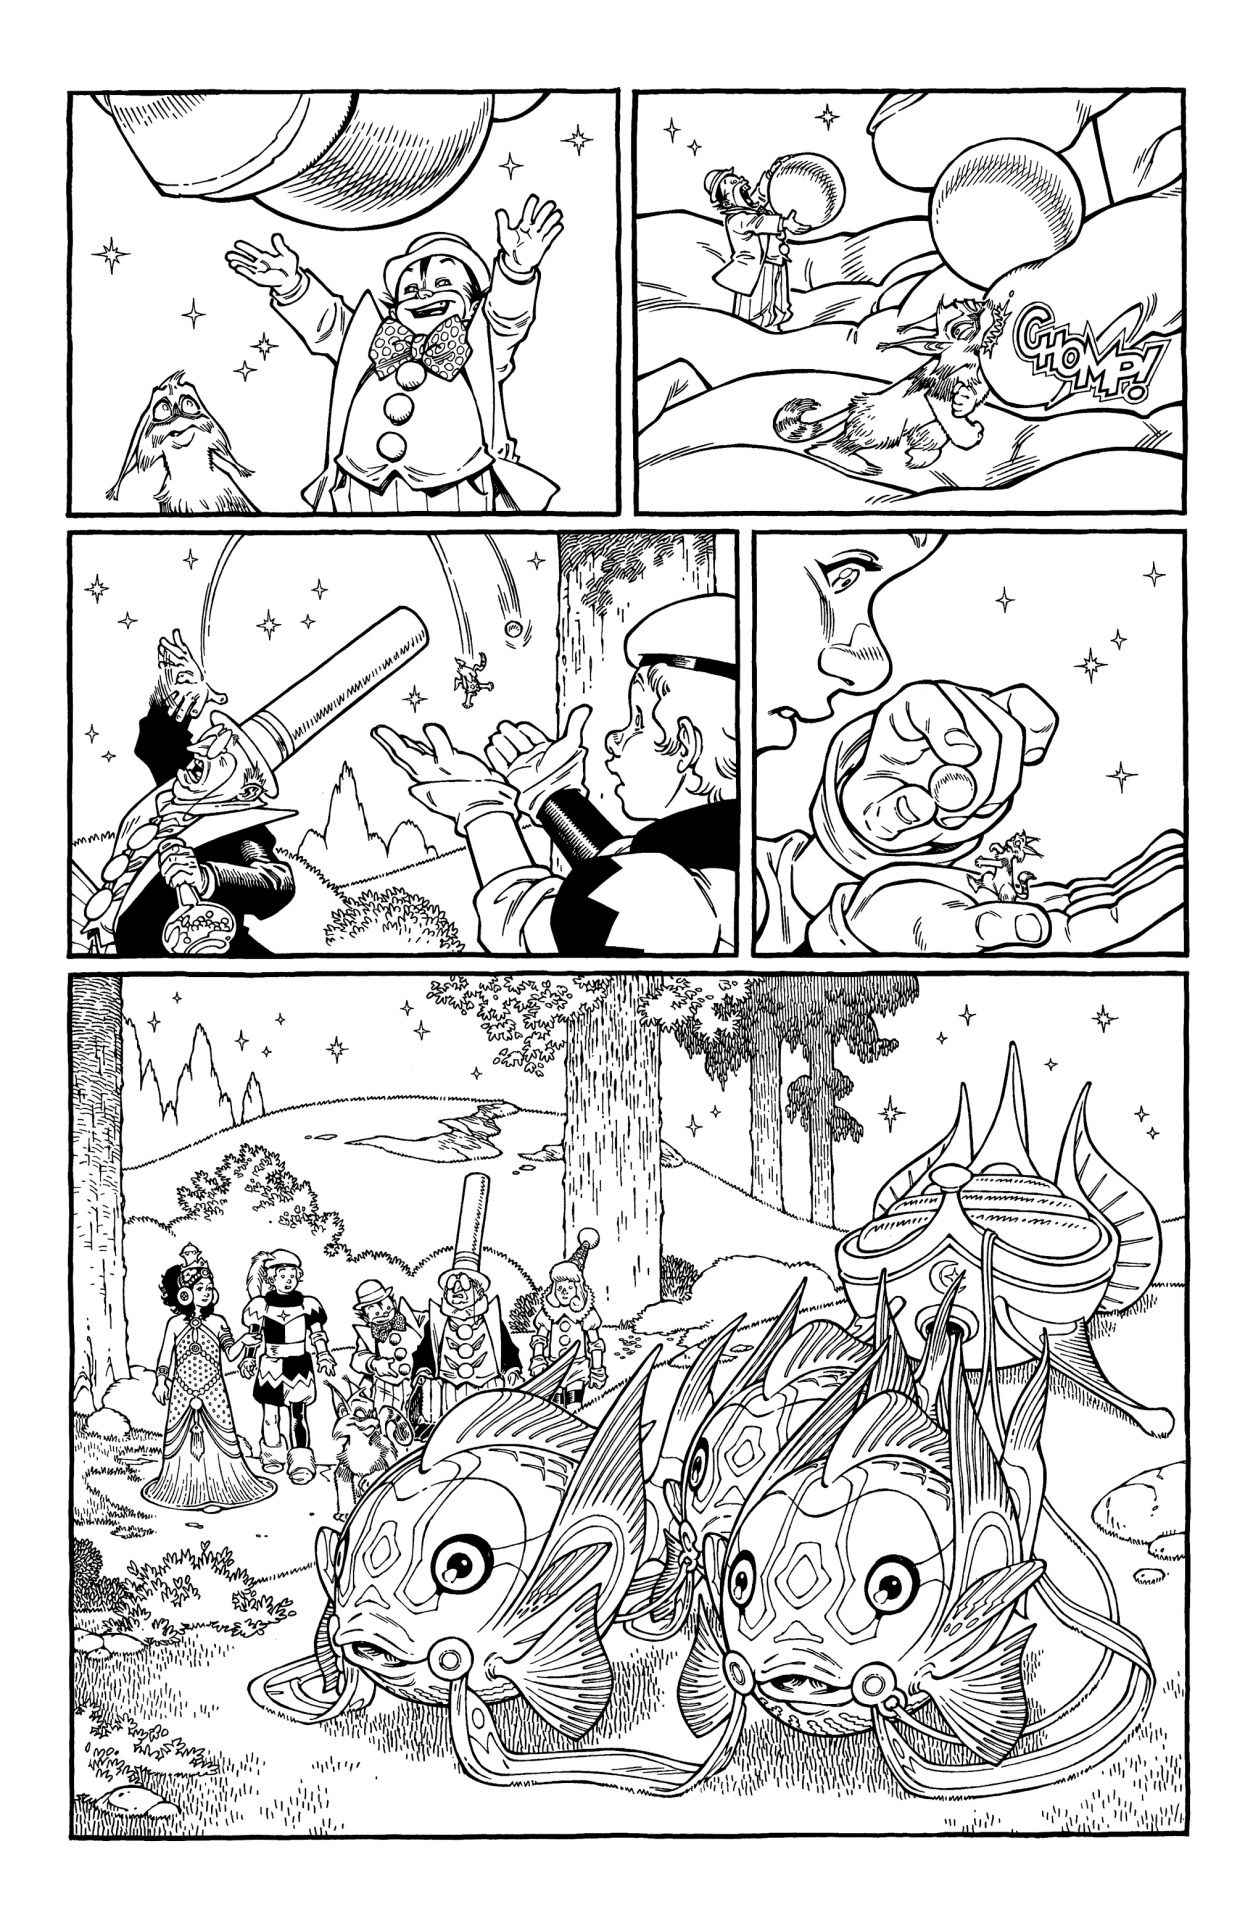 gr-comics:page art process from “Little NEMO: Return To Slumberland” #4, out